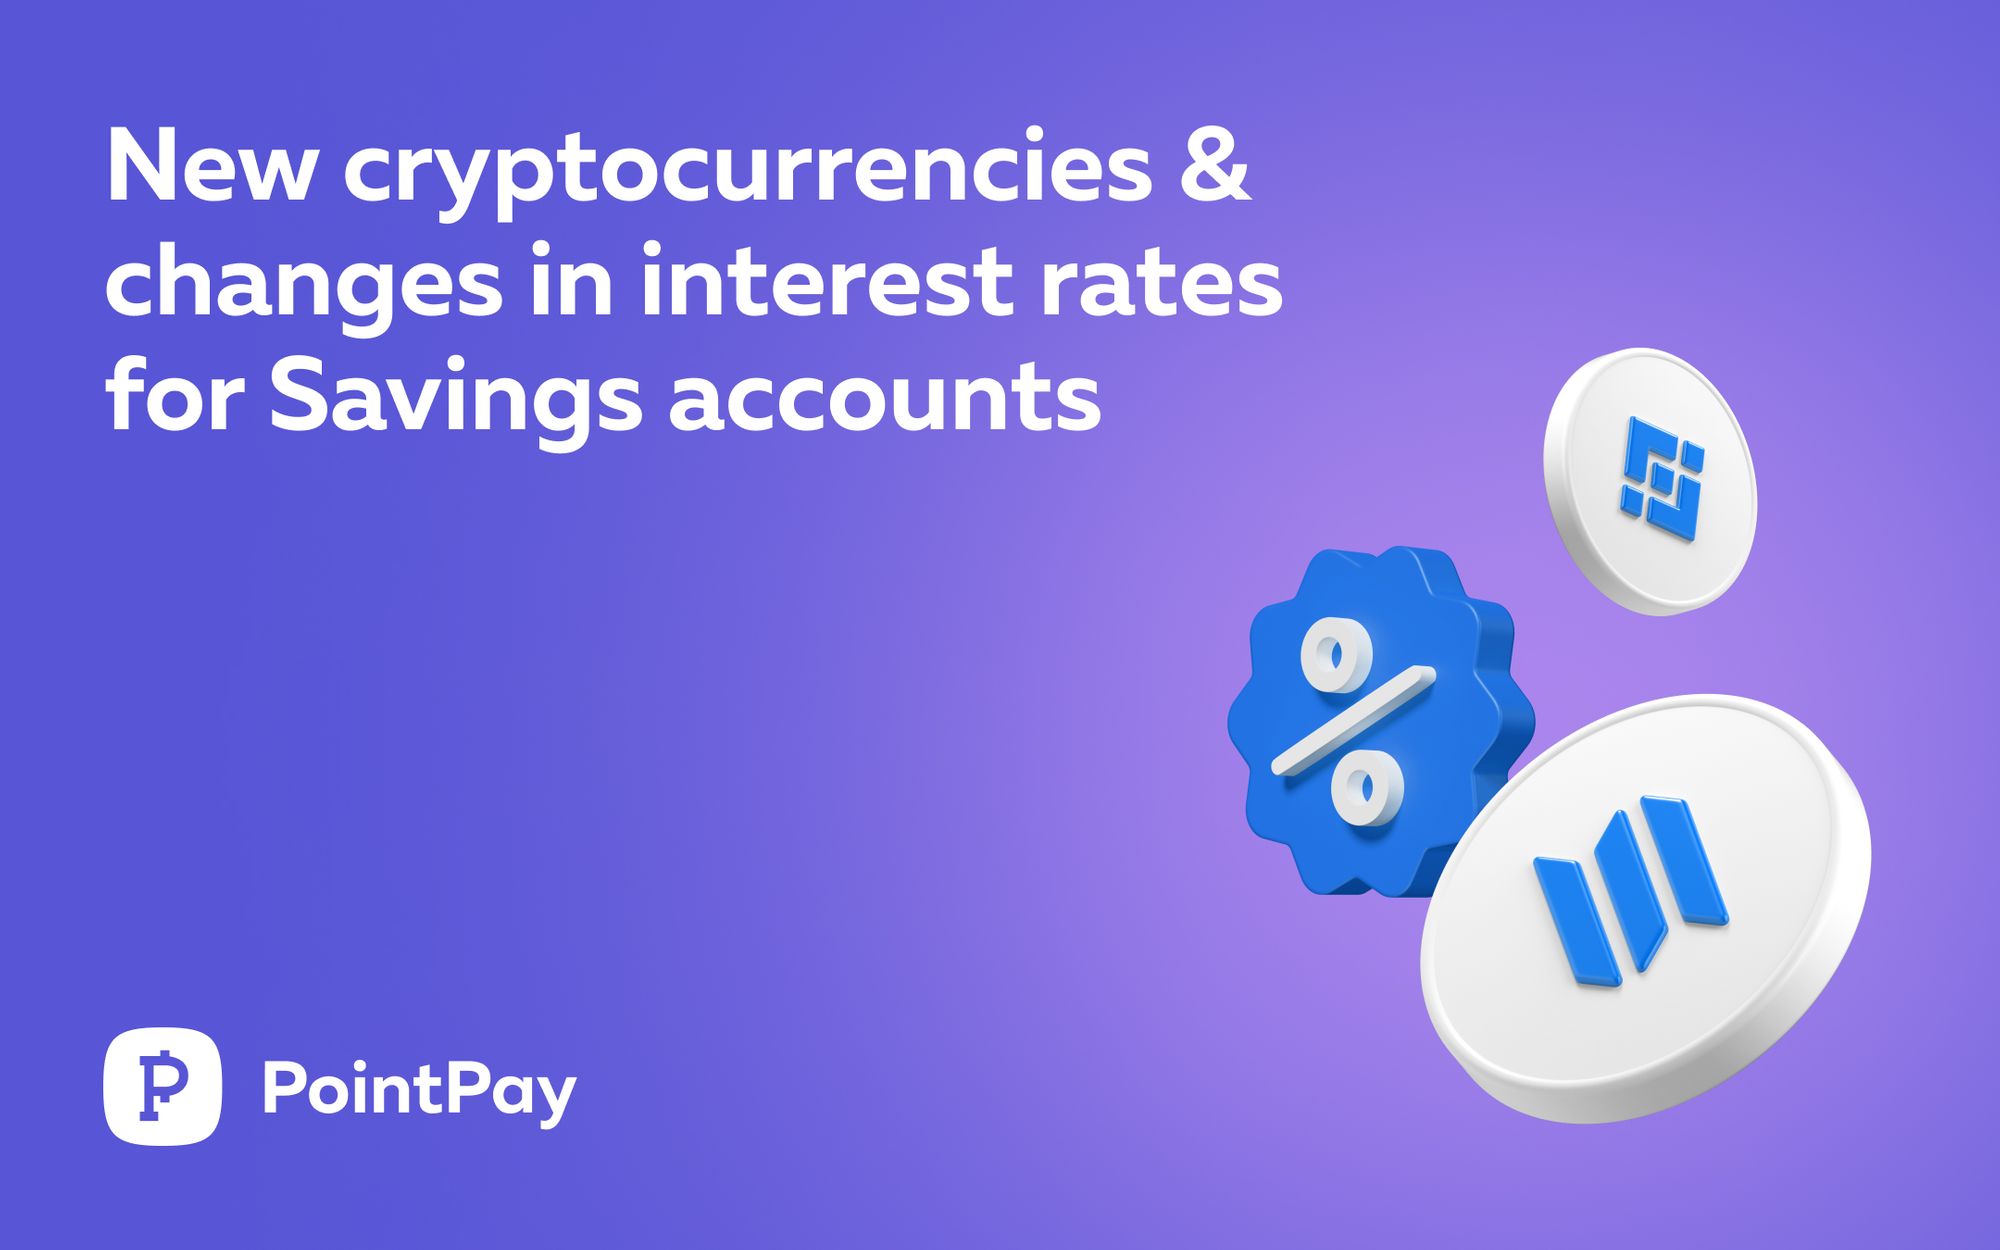 New cryptocurrencies and updated interest rates for Savings accounts